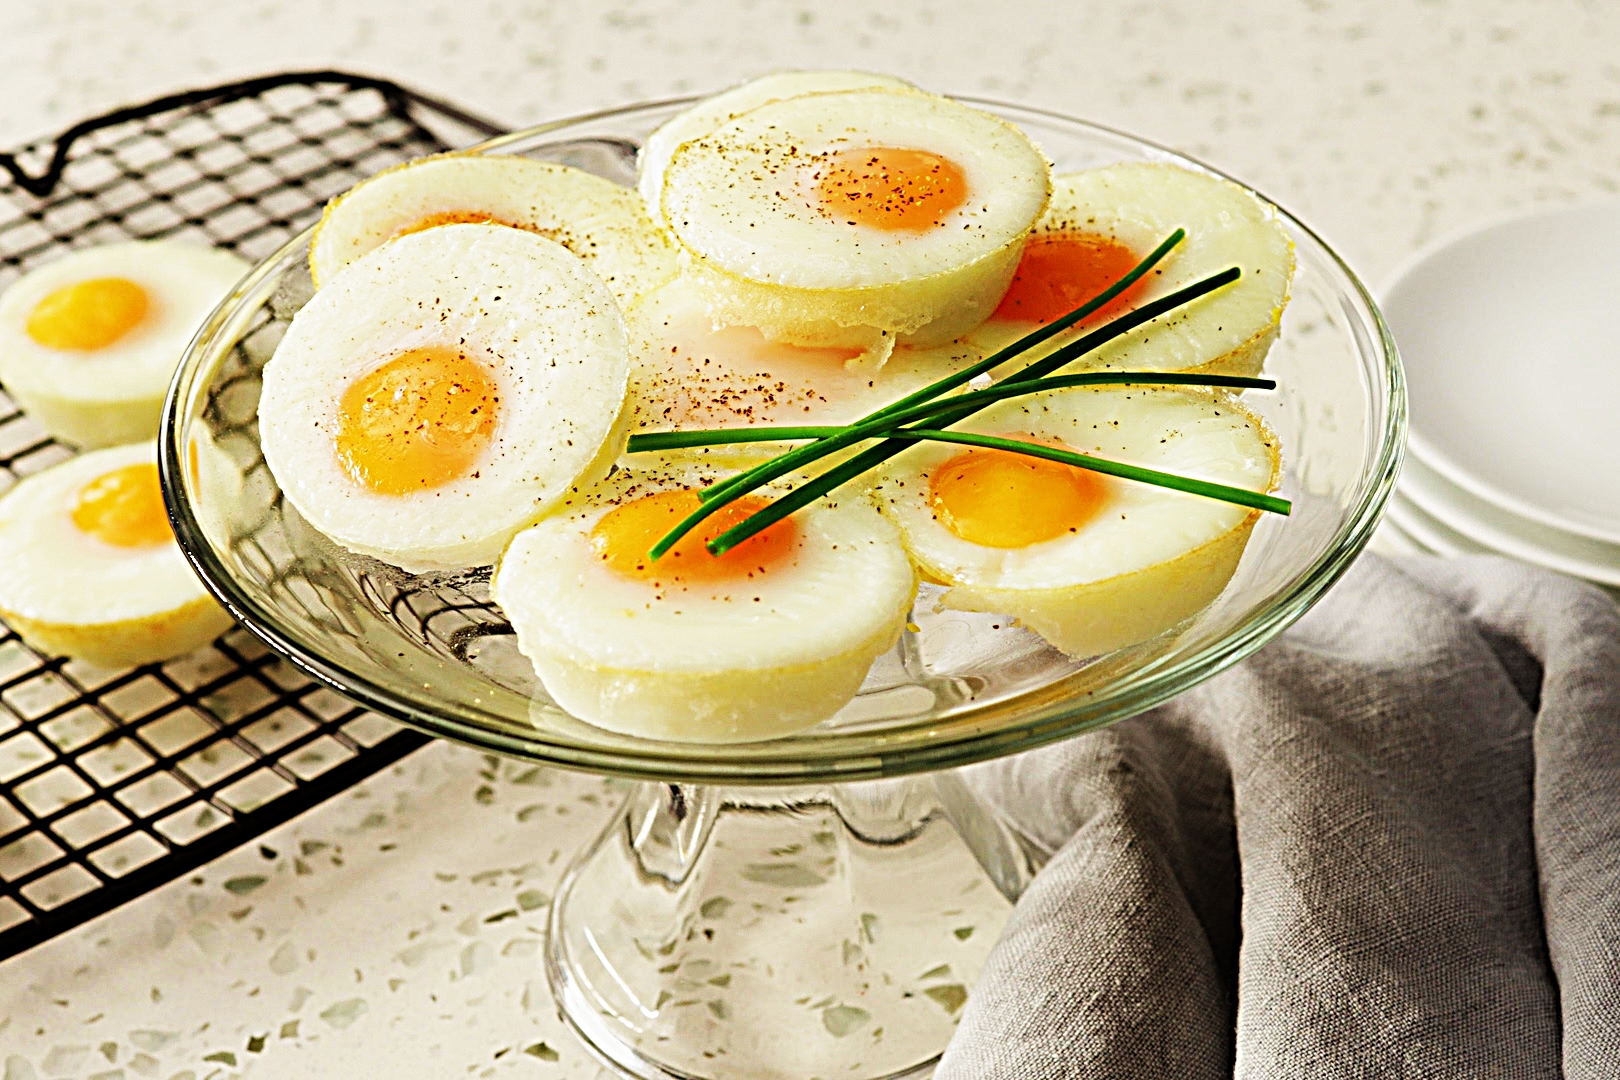 Stupid-Easy Recipe for Oven-Baked Eggs (#1 Top-Rated)